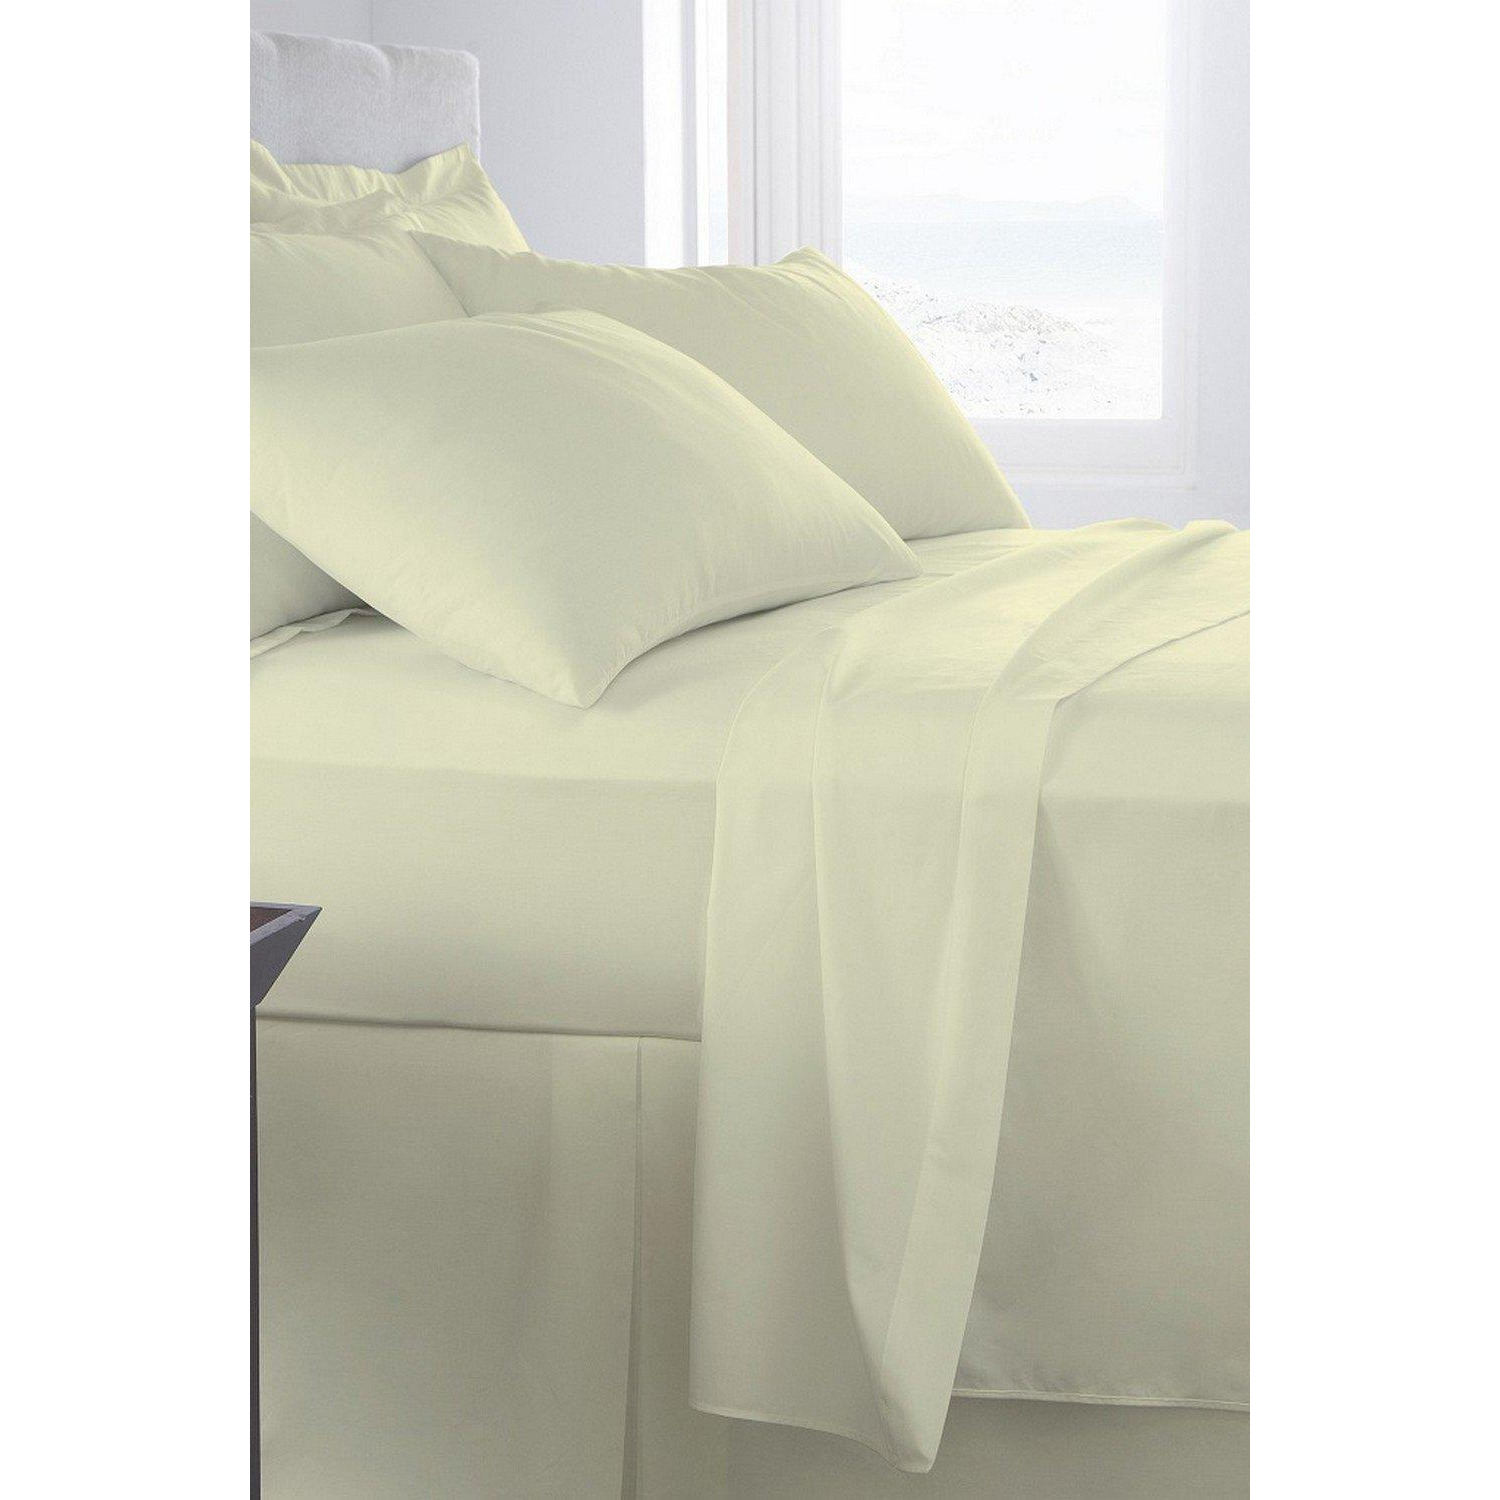 "Egyptian Cotton Deep Fitted Sheet - 400 Thread Count - 16"" Deep" - image 1